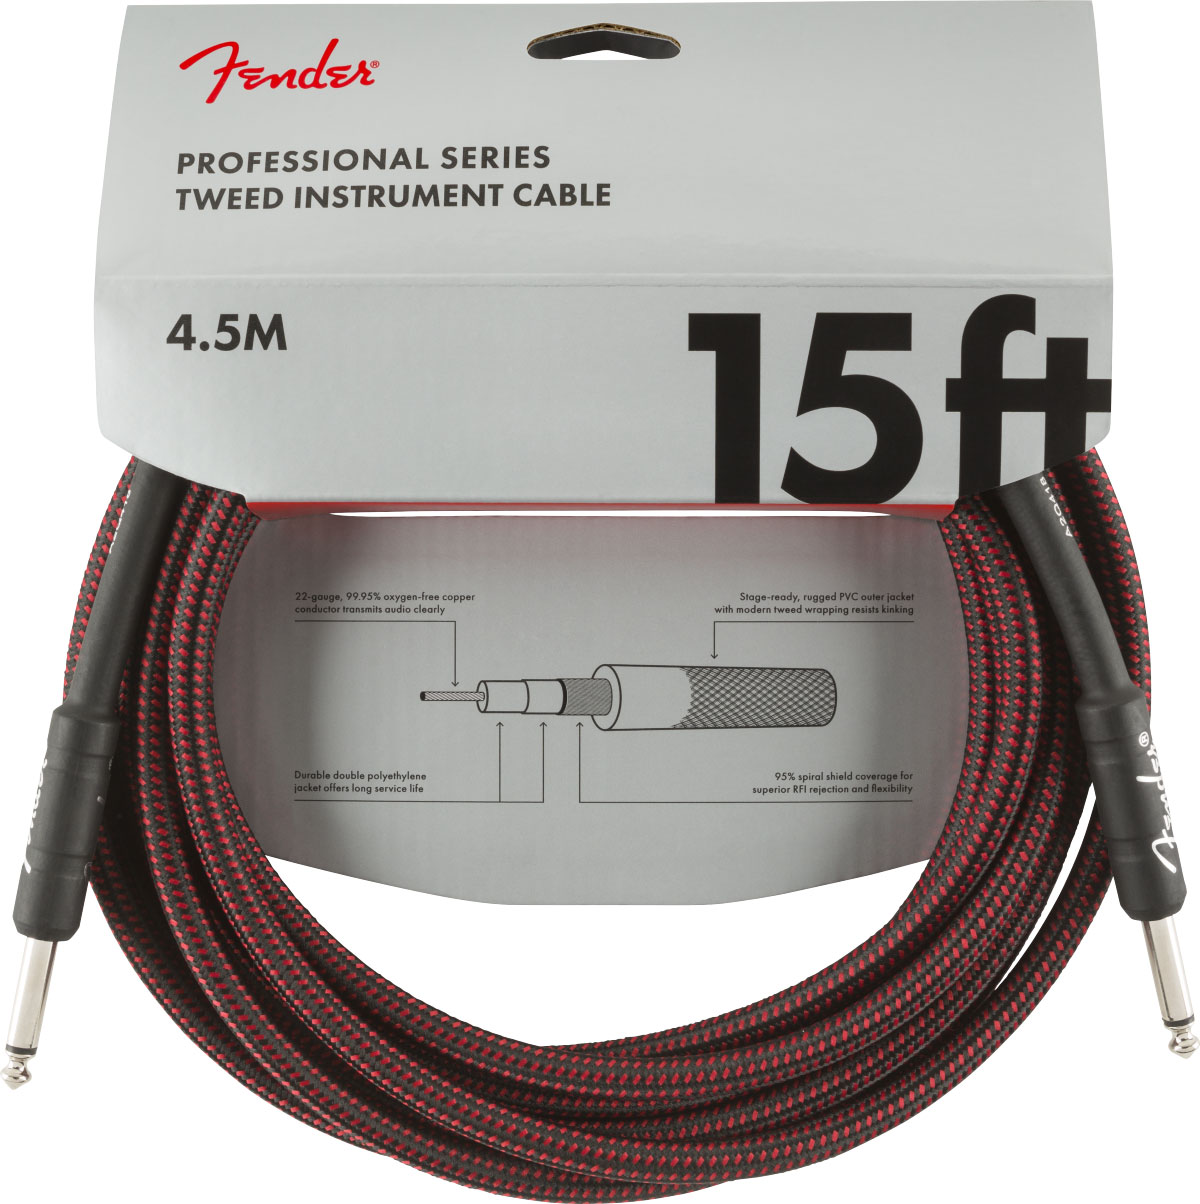 FENDER PROFESSIONAL INSTRUMENT CABLE, 15', RED TWEED